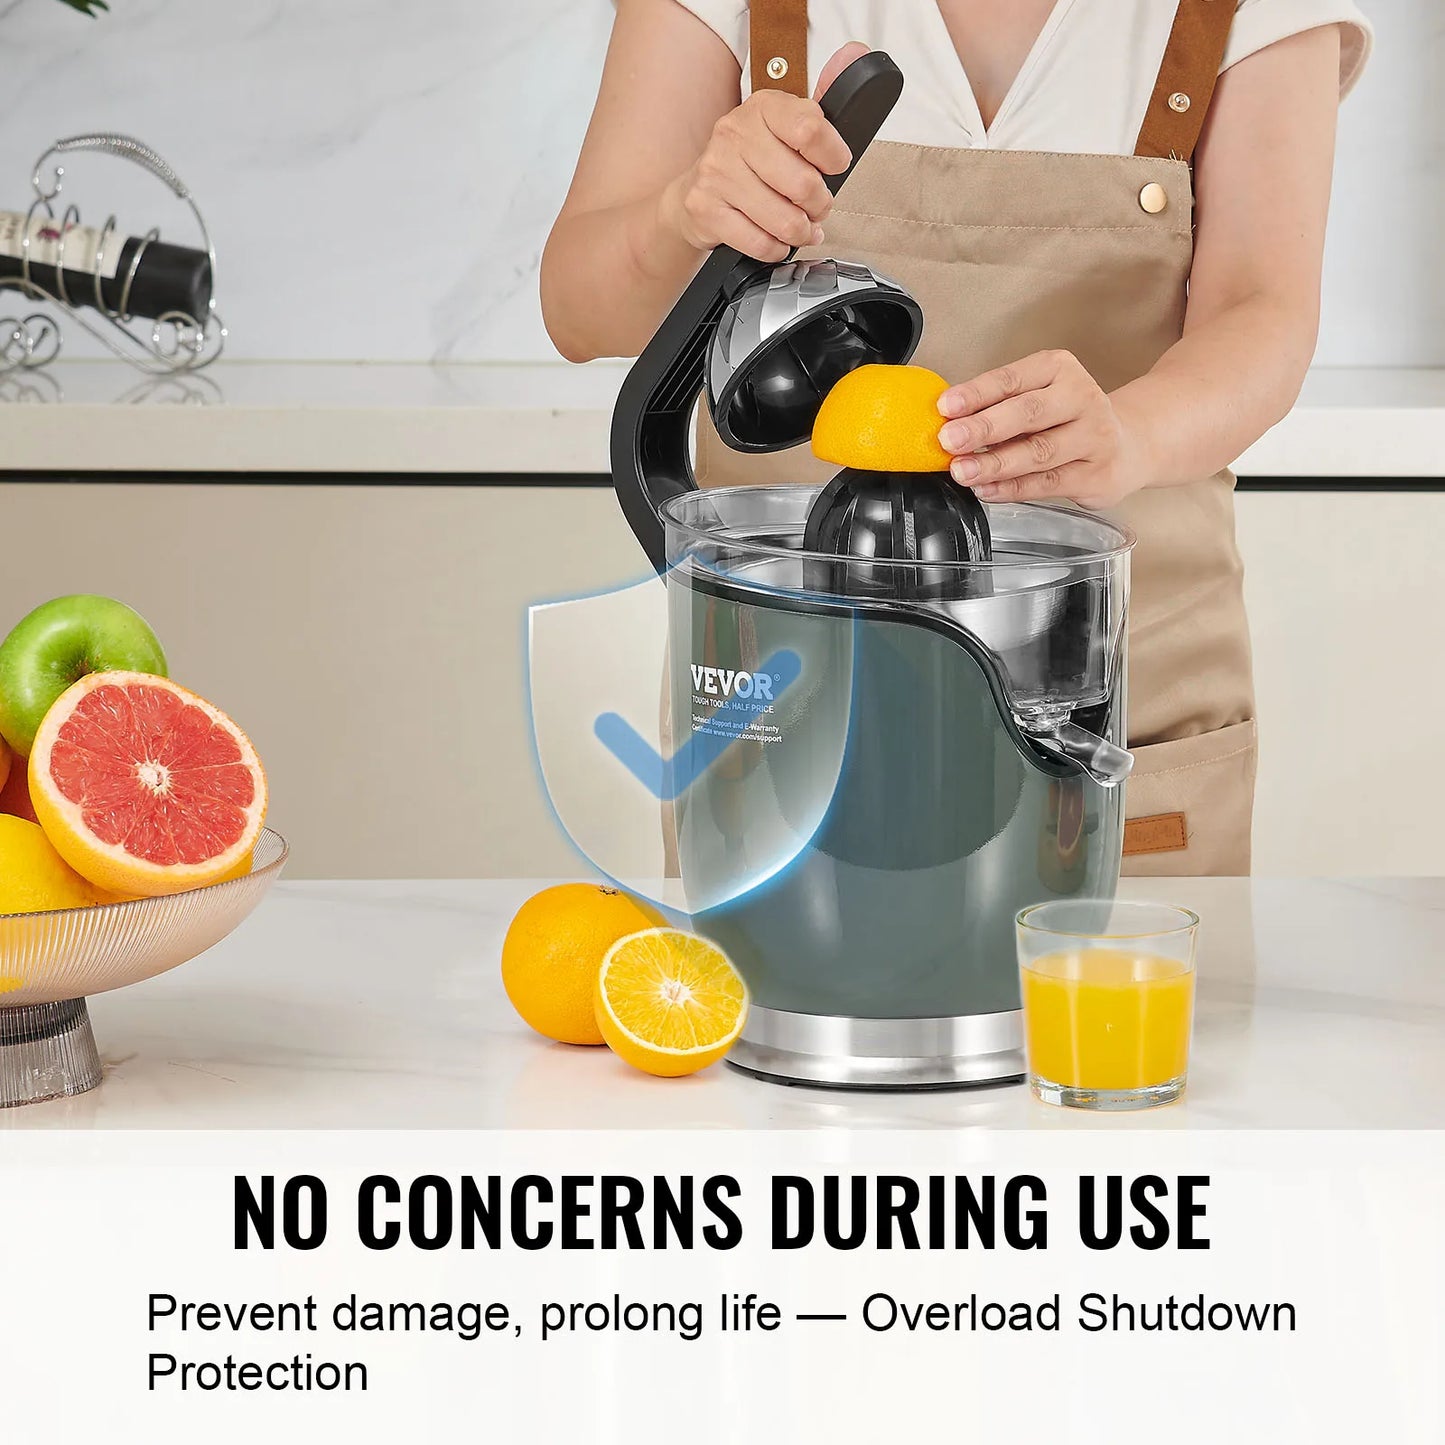 Electric Citrus Juicer with Two Size Juicing Cones